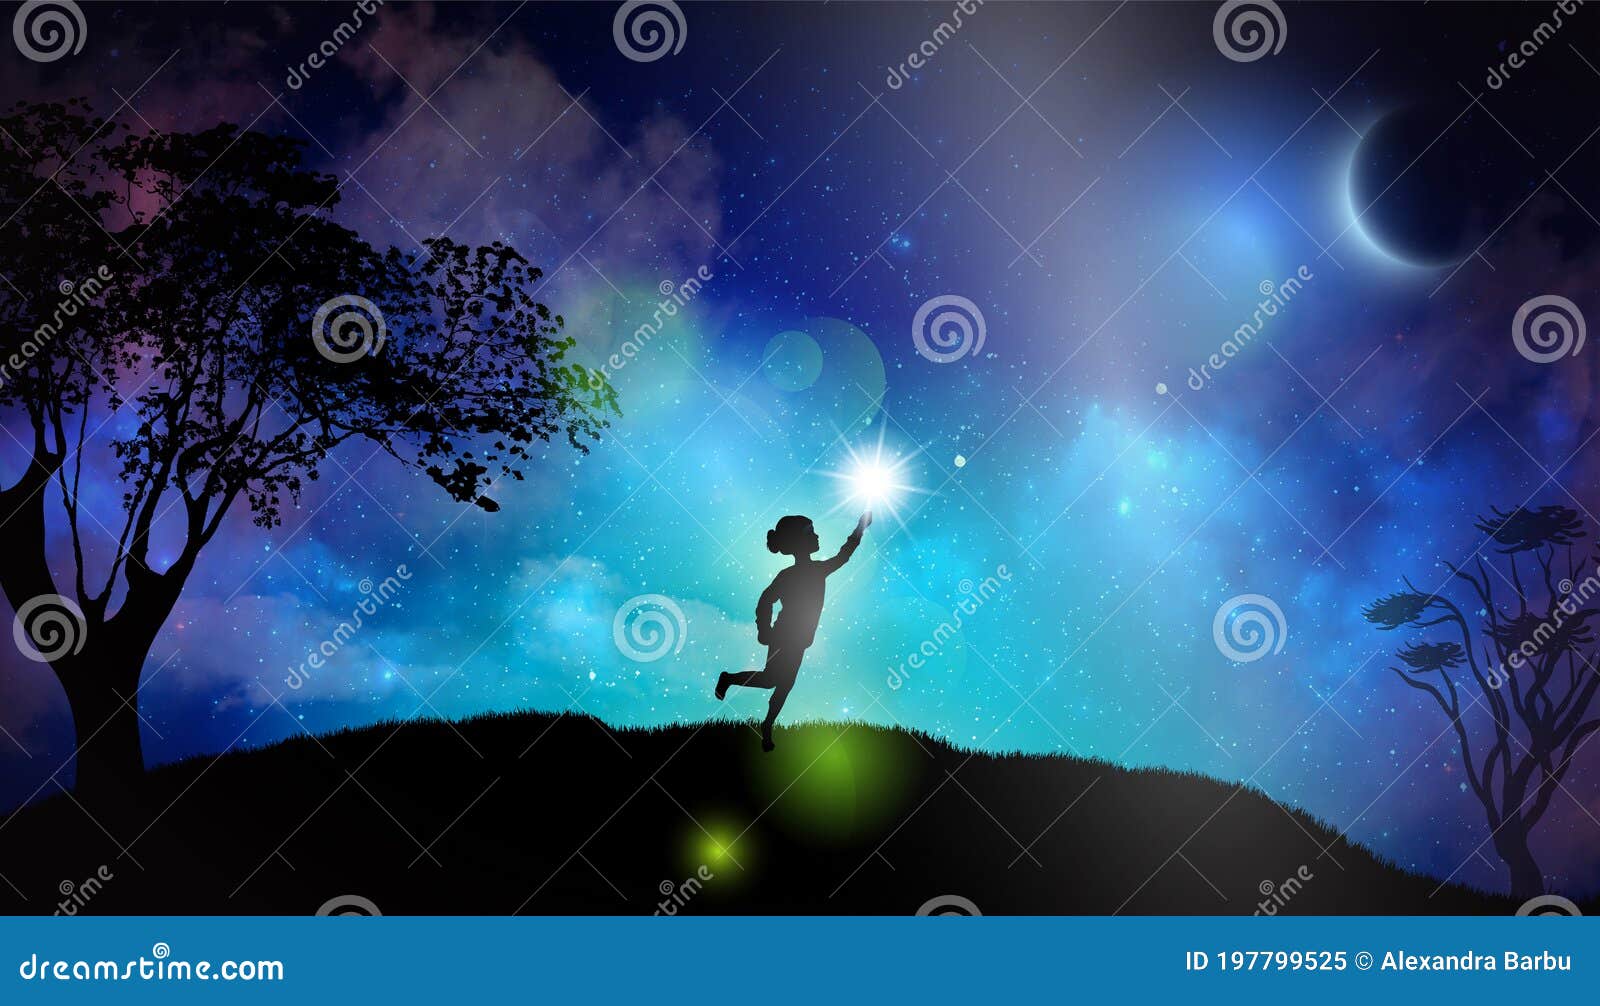 child with spark of hope, the light of faith, new moon, night sky, nature background